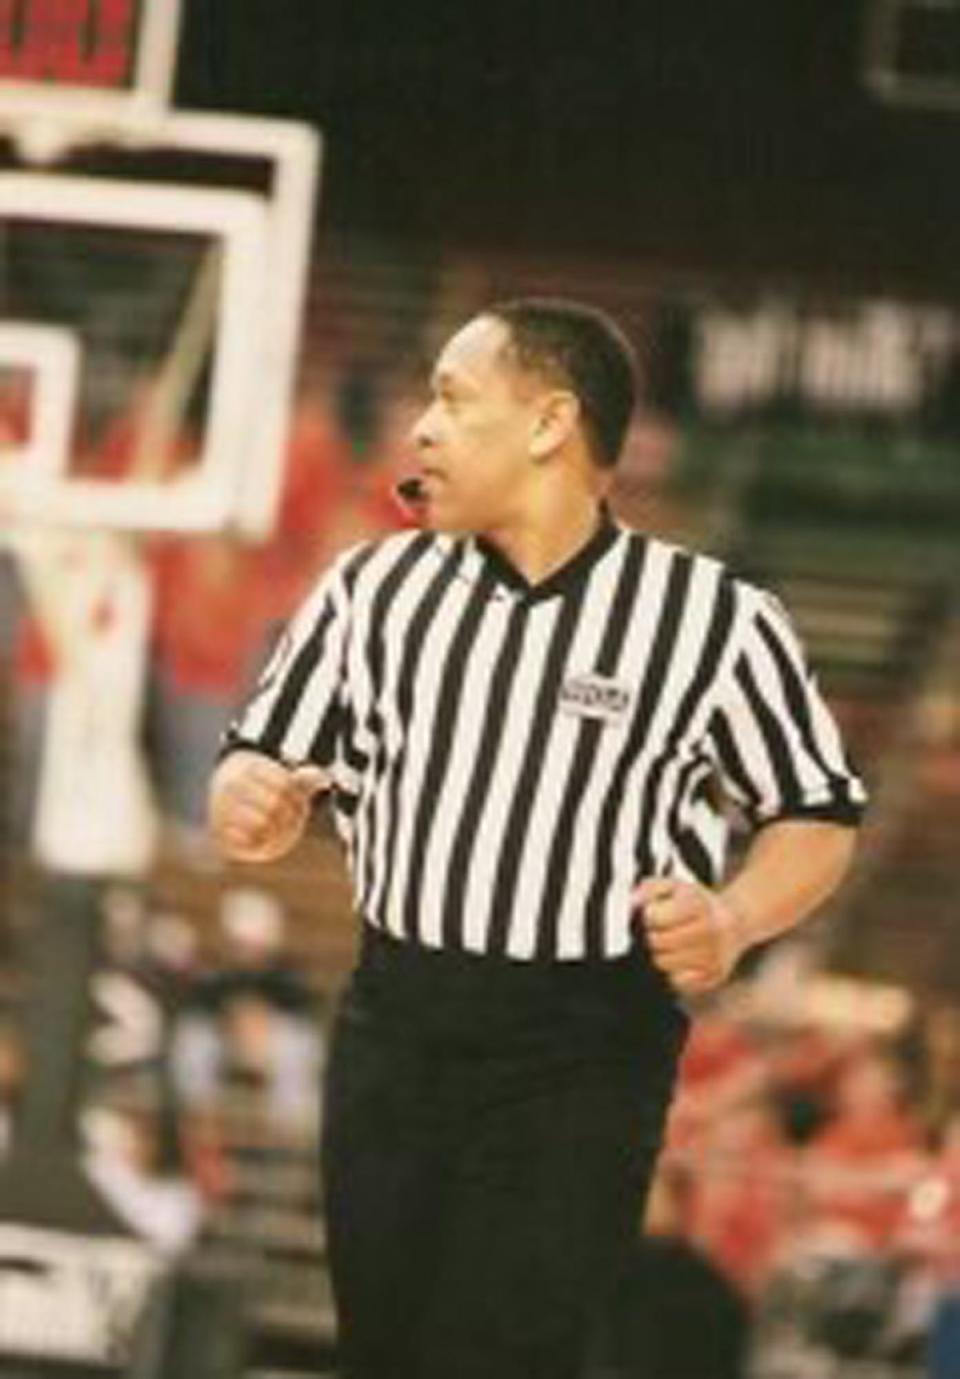 Darrell Monroe, who died at age 53, was honored with induction into the Kitsap Sports Hall of Fame and with a Peninsula Basketball Officials Association annual award named in his honor.